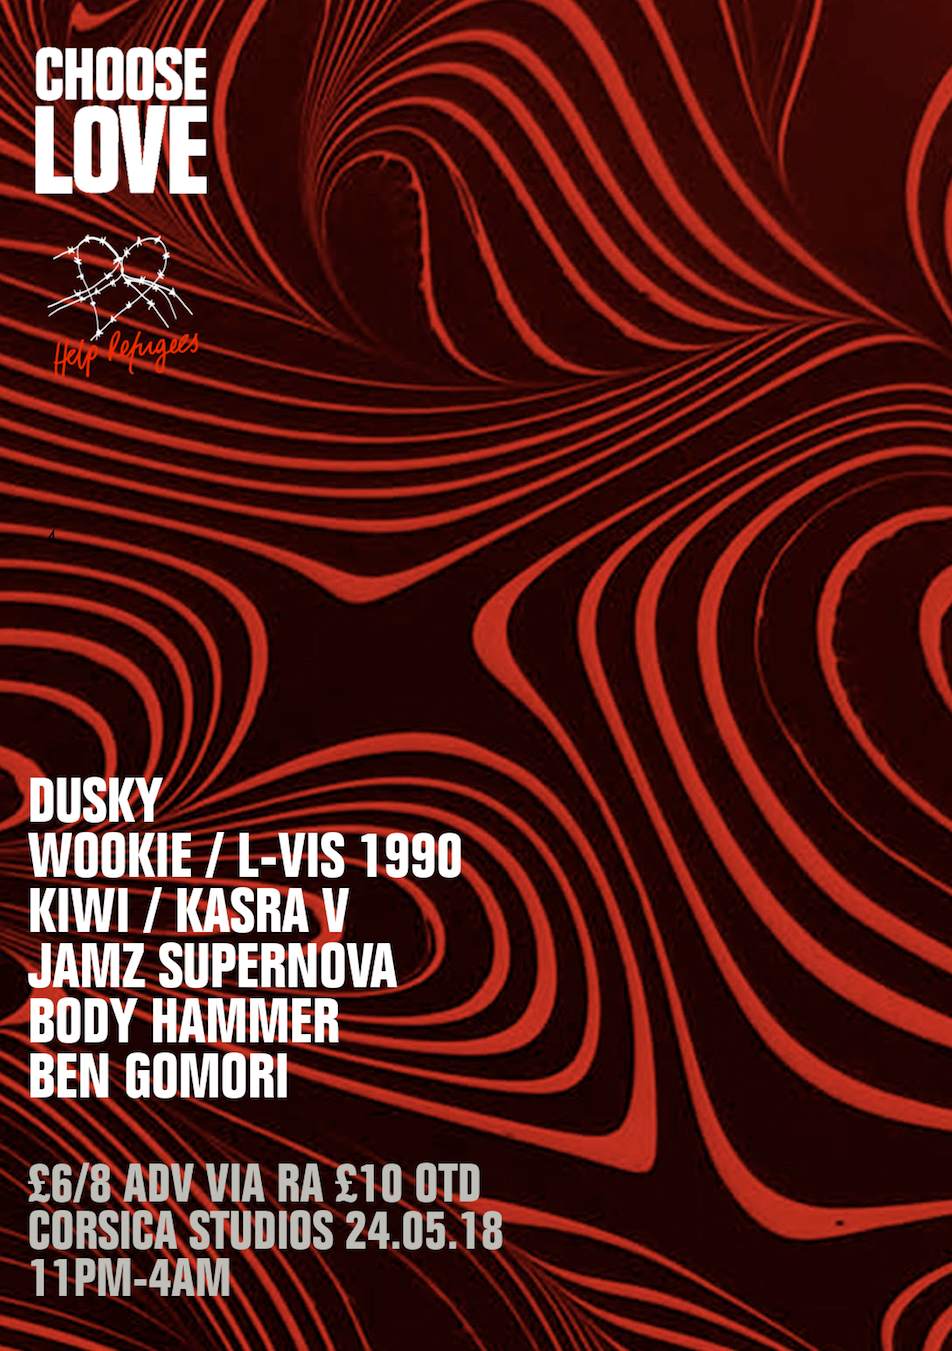 Dusky, Wookie, L-VIS 1990 to play Help Refugees night at London's Corsica Studios image